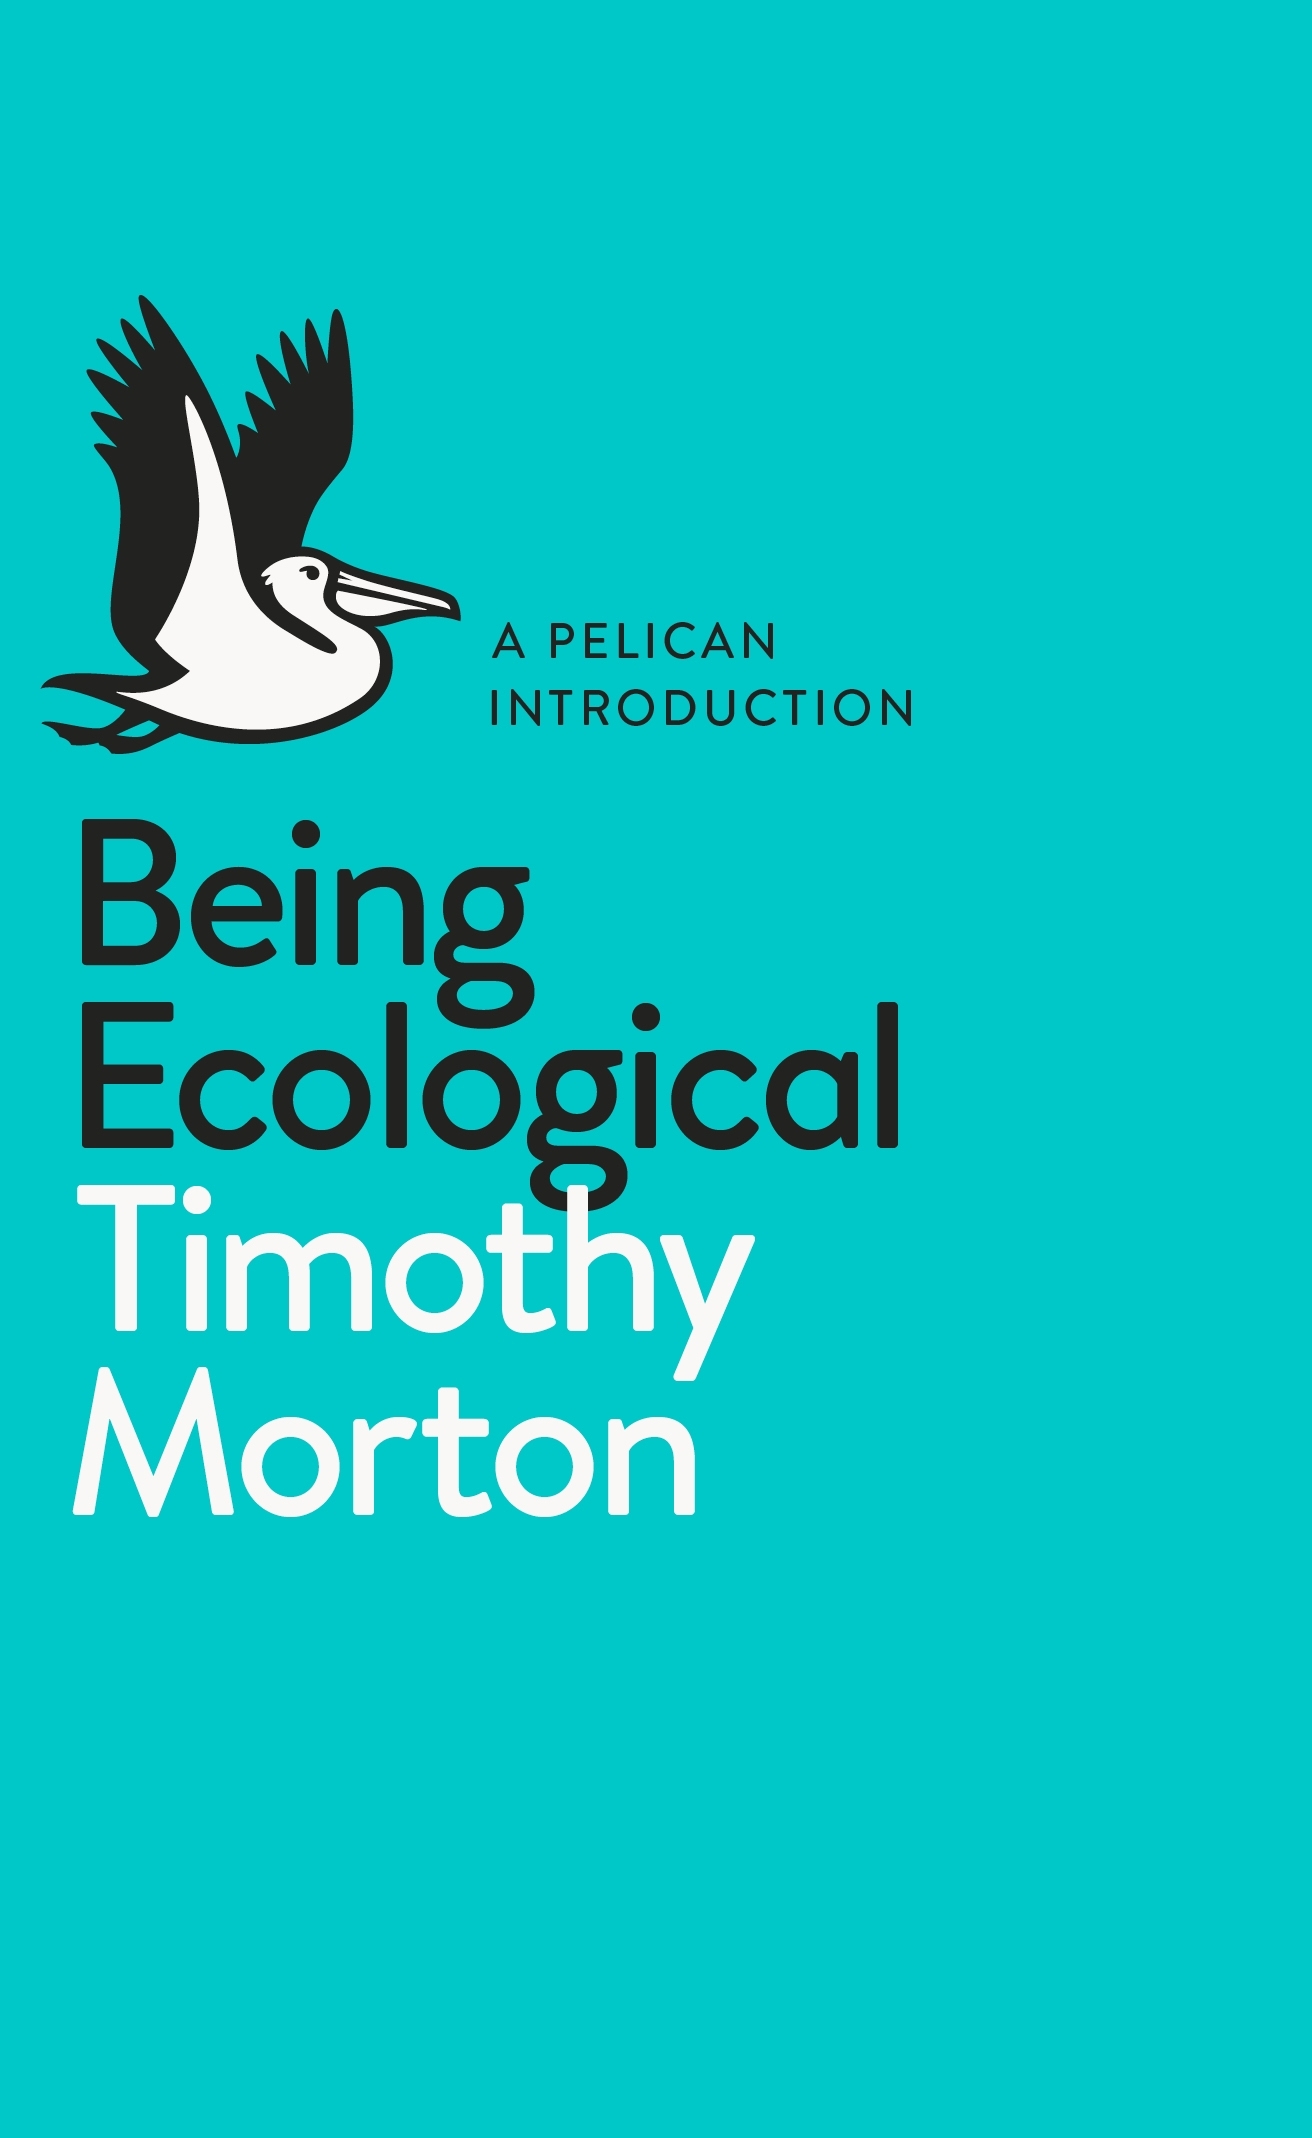 Being Ecological | Timothy Morton